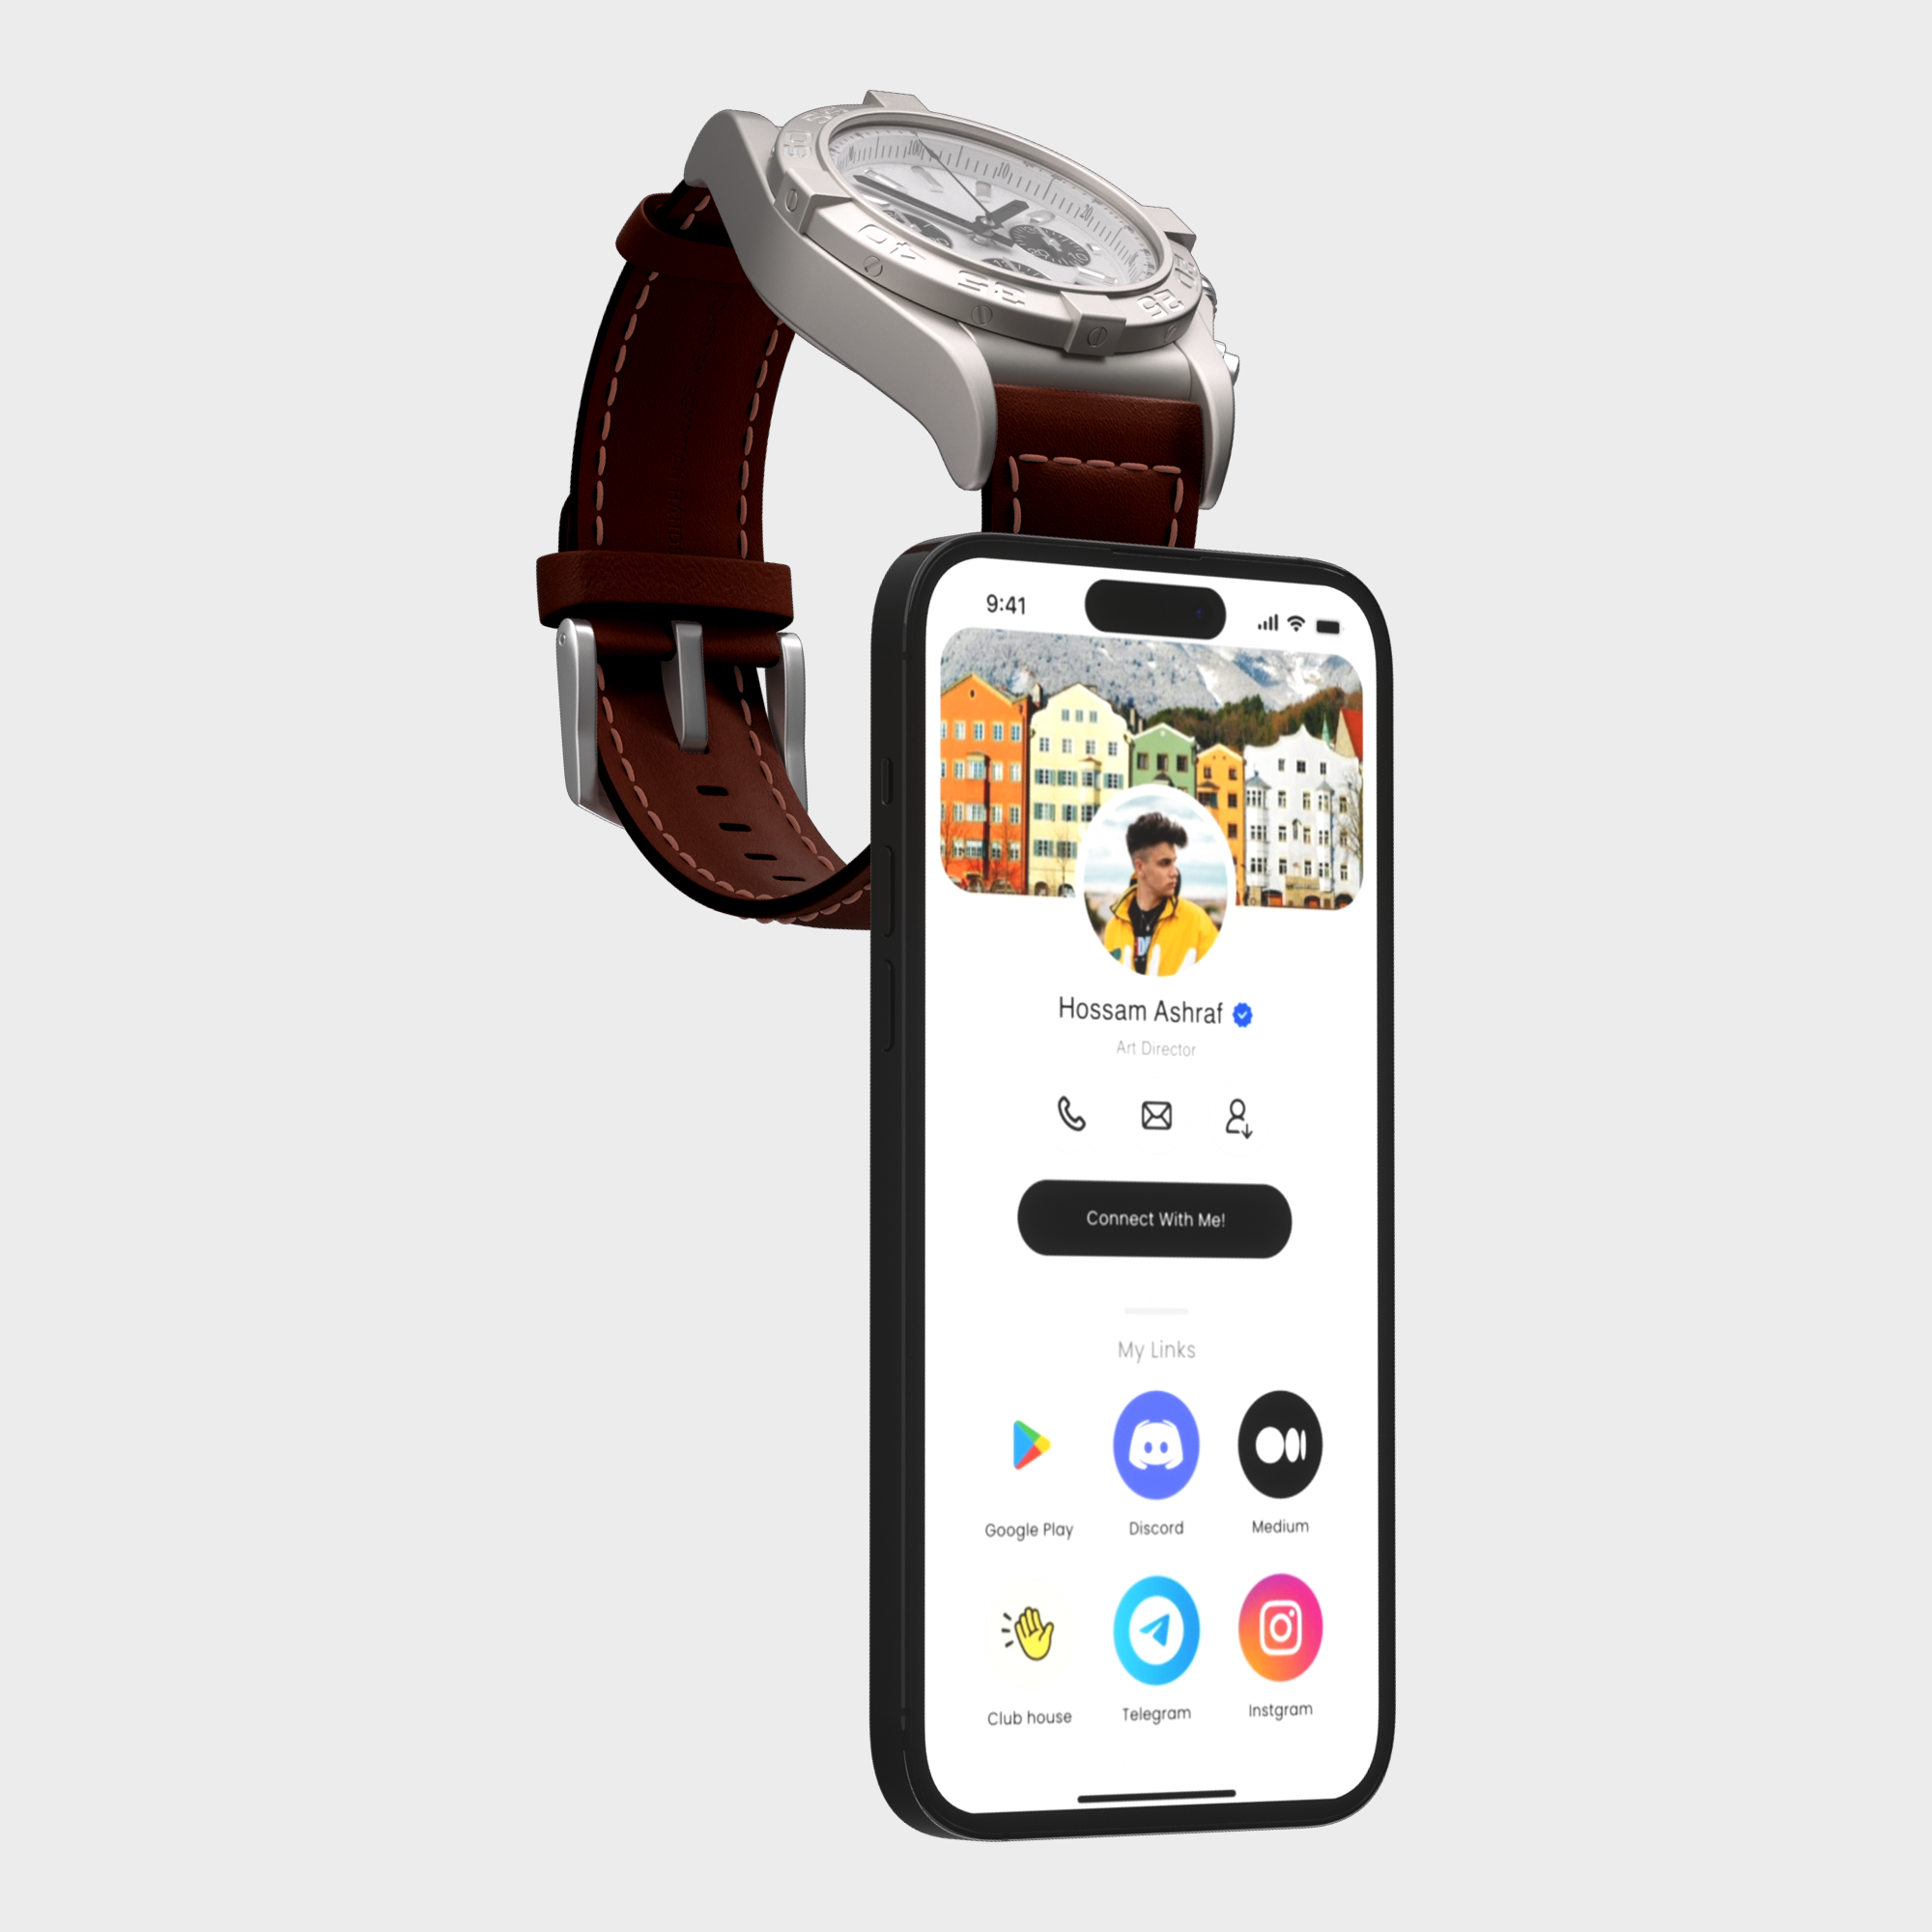 Luxury wristwatch paired with a smartphone displaying a personal profile and social media apps.